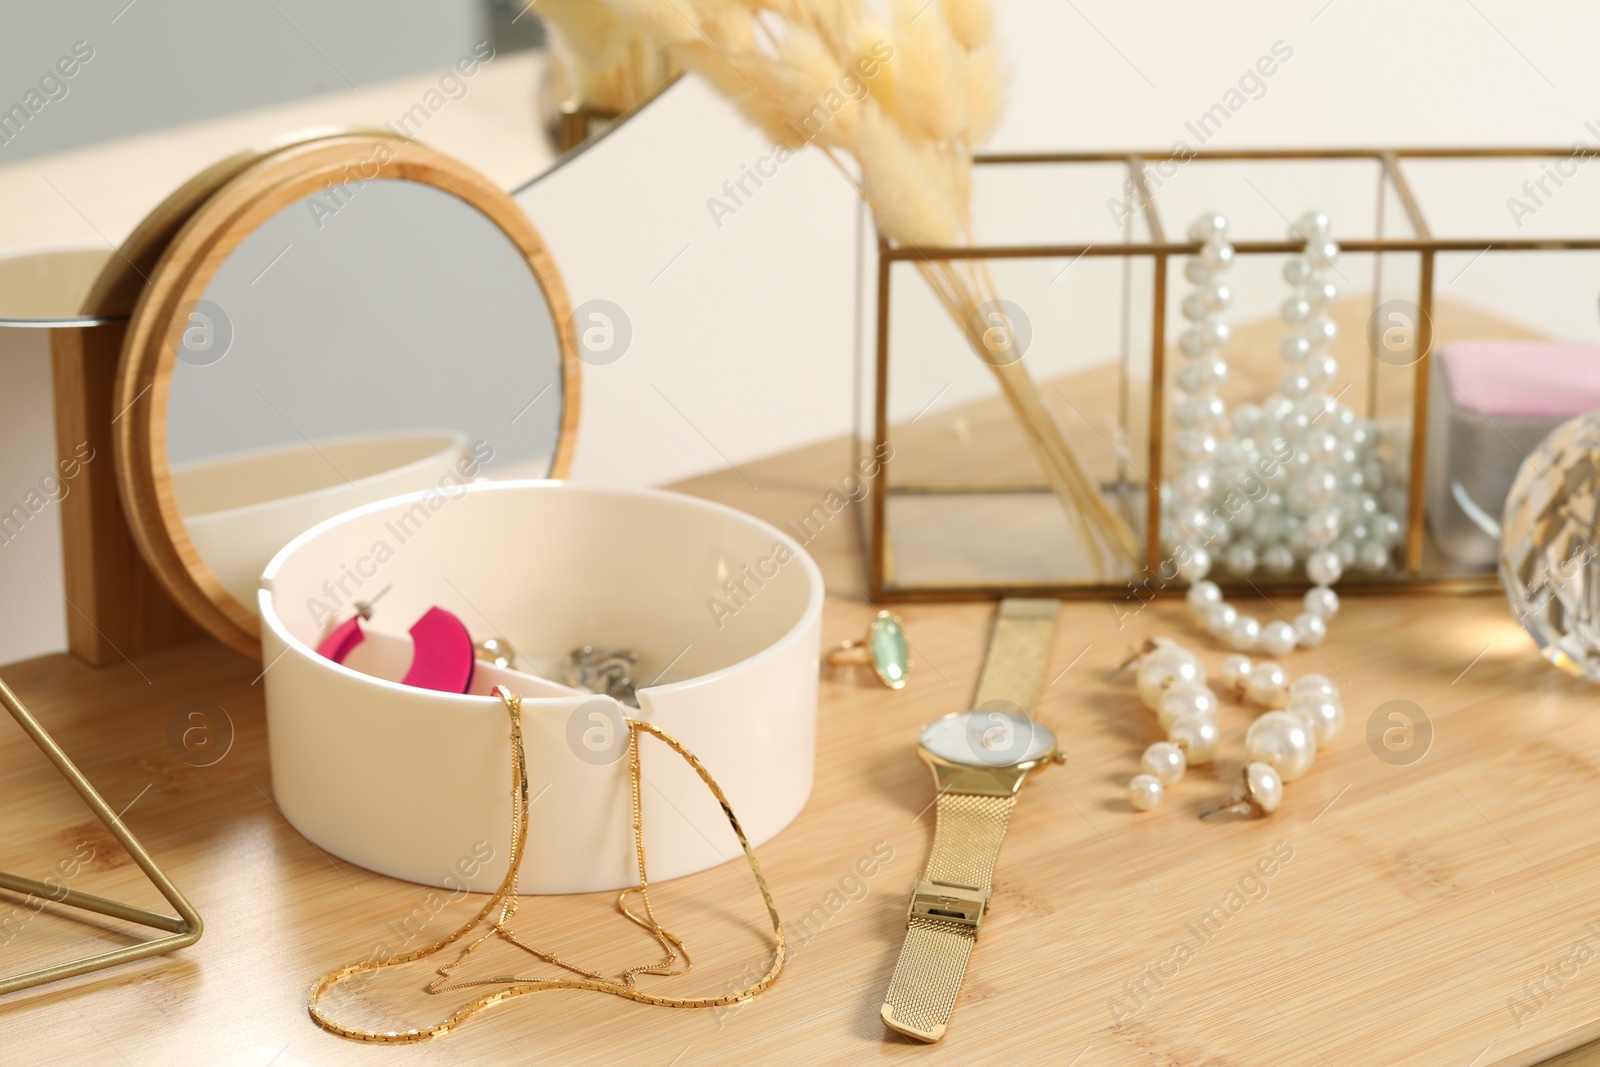 Photo of Jewelry box with many different accessories, wristwatch and decor on wooden table